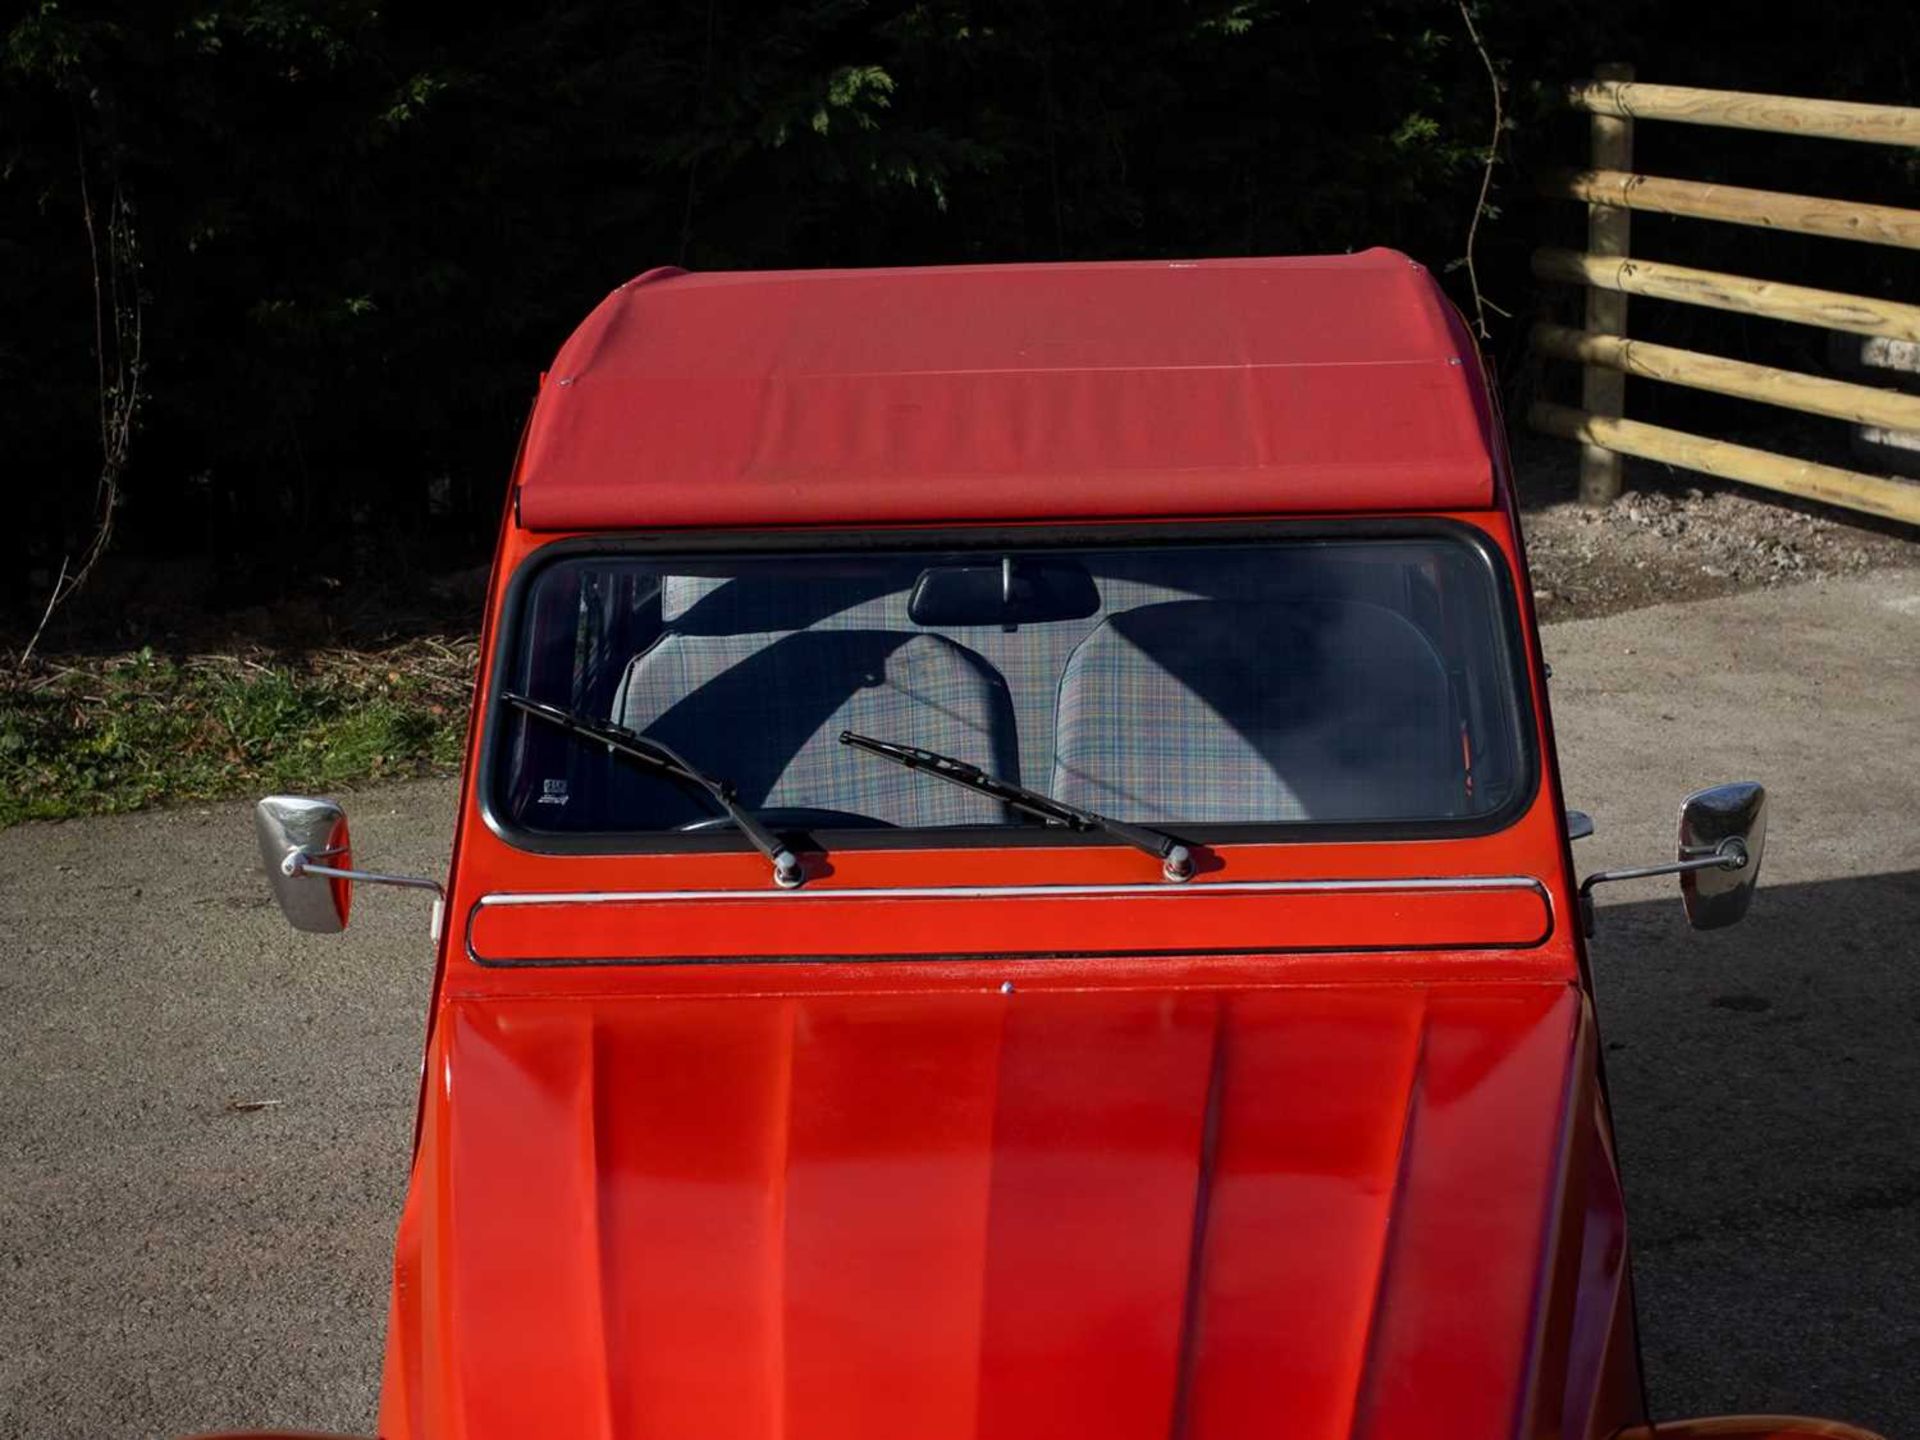 1989 Citroën 2CV6 Spécial Believed to have covered a credible 15,000 miles - Image 6 of 113